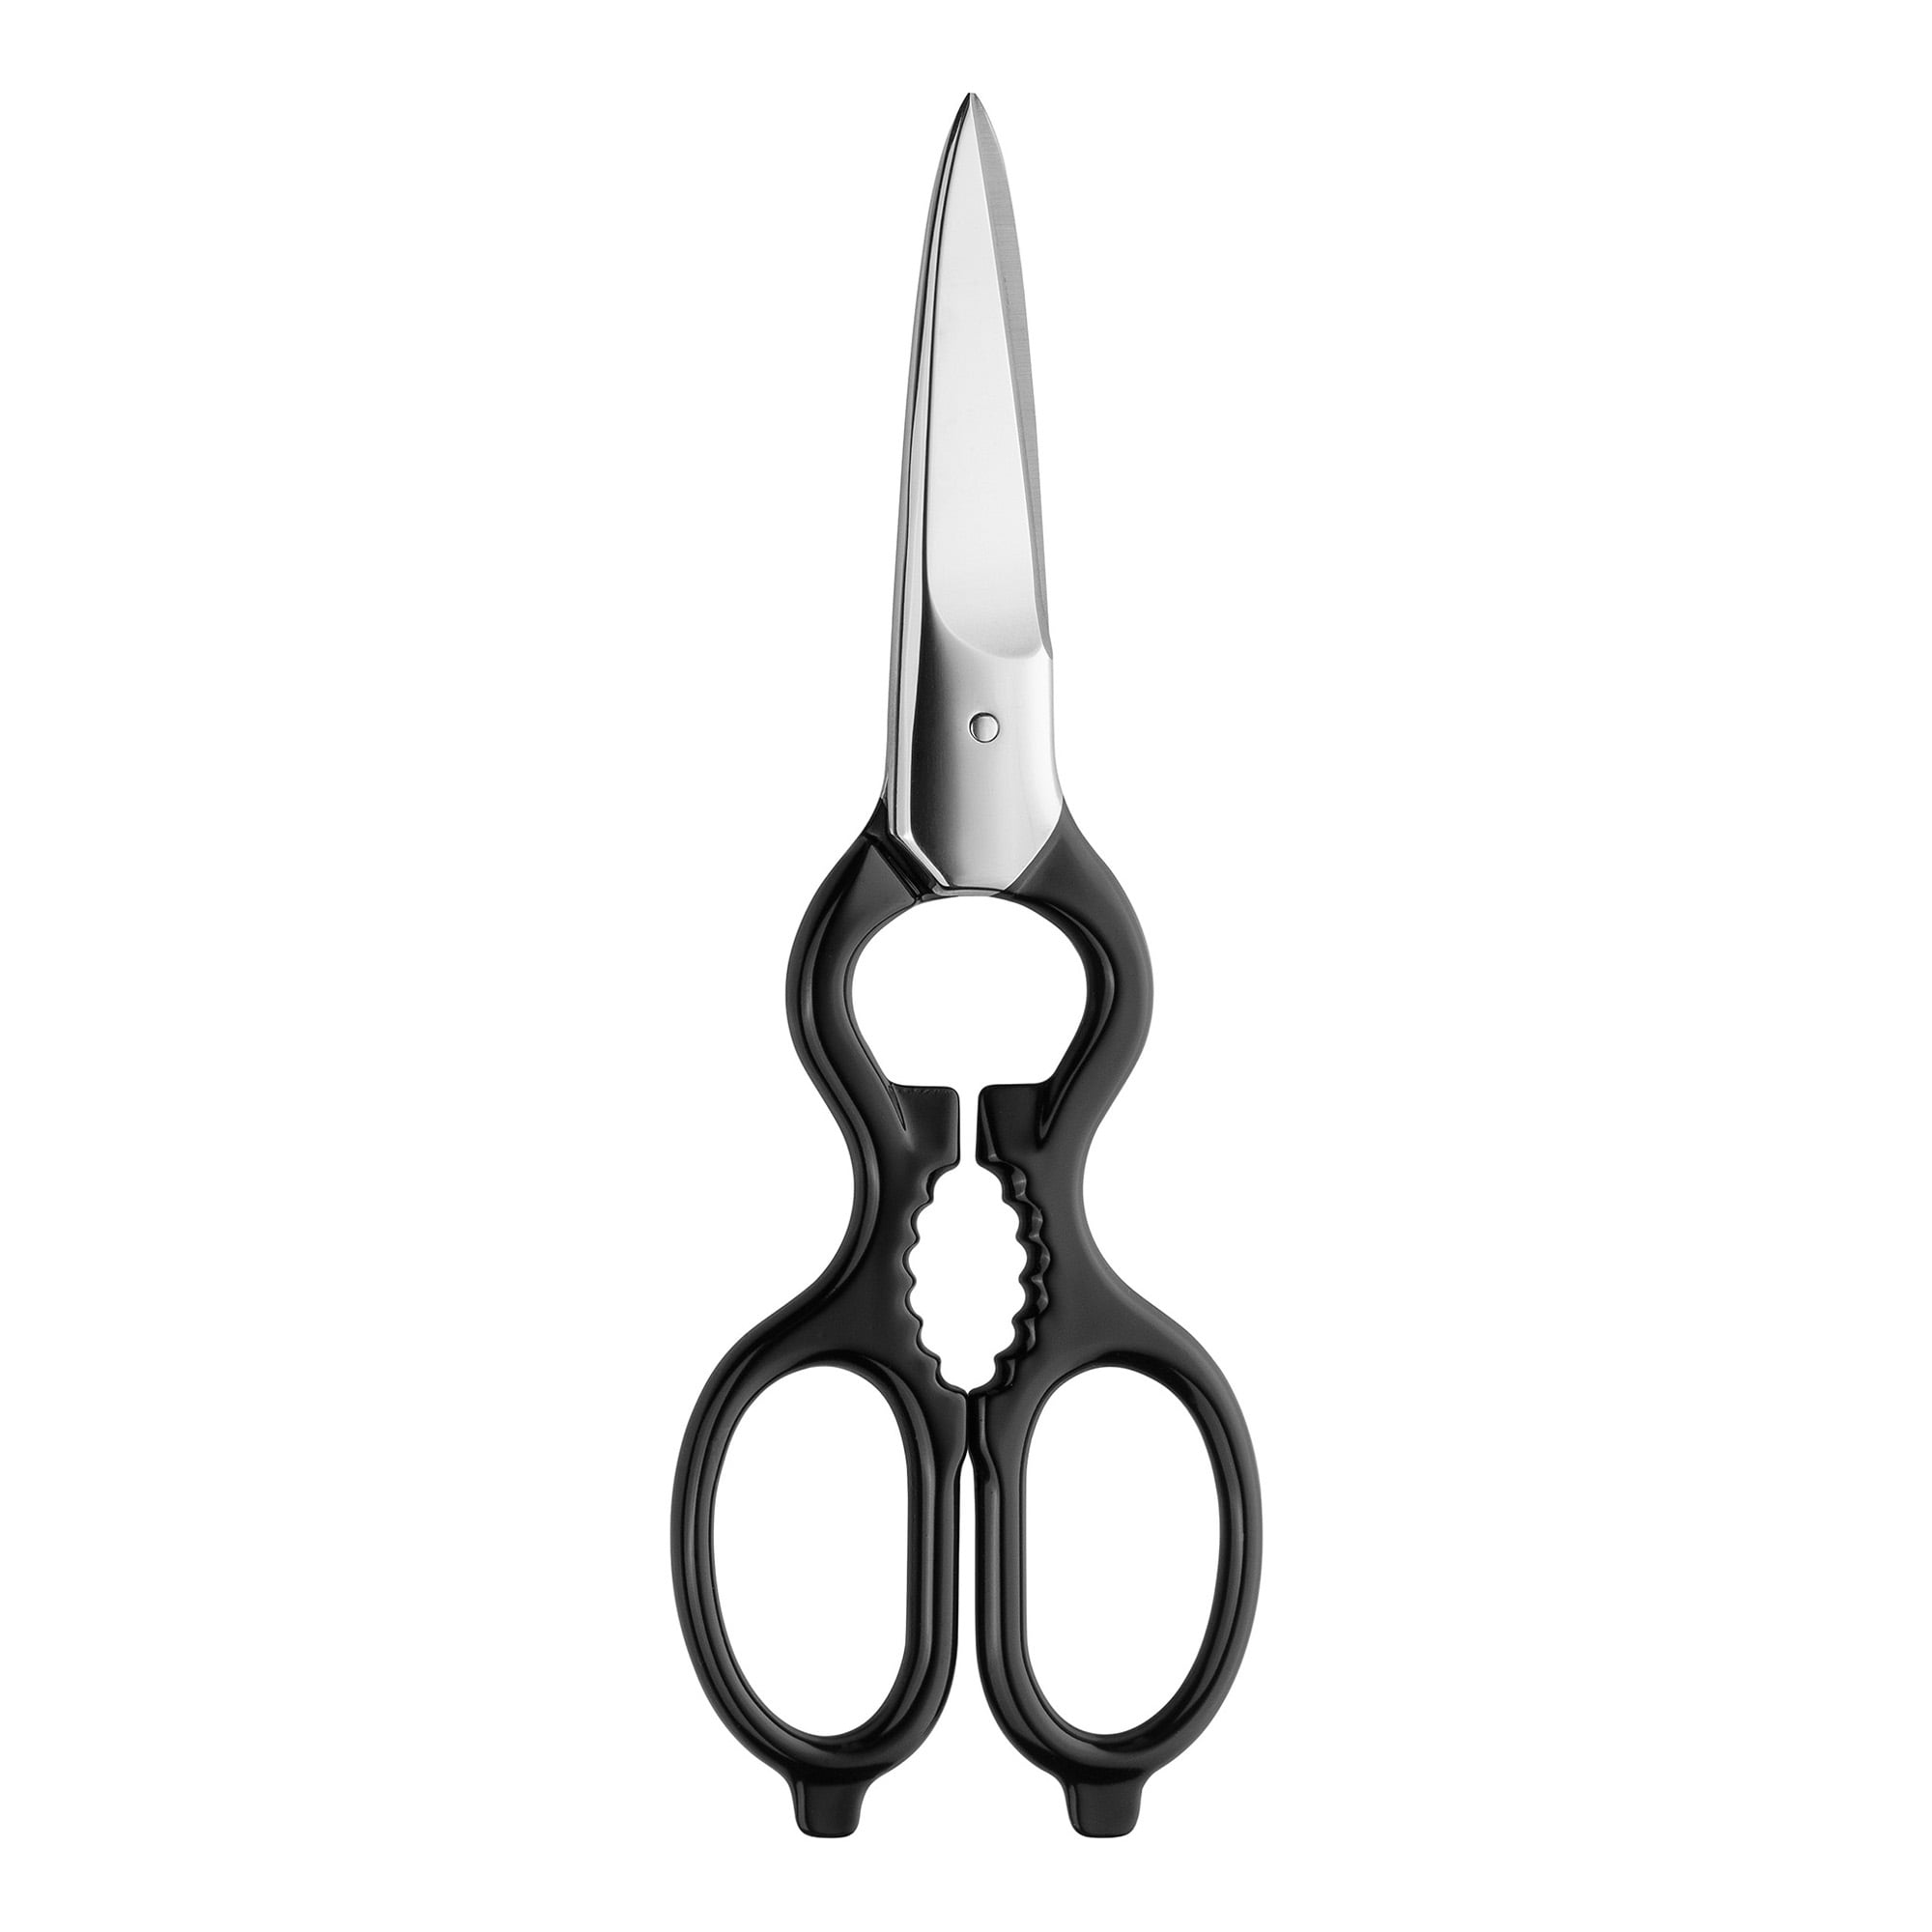  Zwilling Superfection Classic Household Scissors, Silver/Black  : Clothing, Shoes & Jewelry